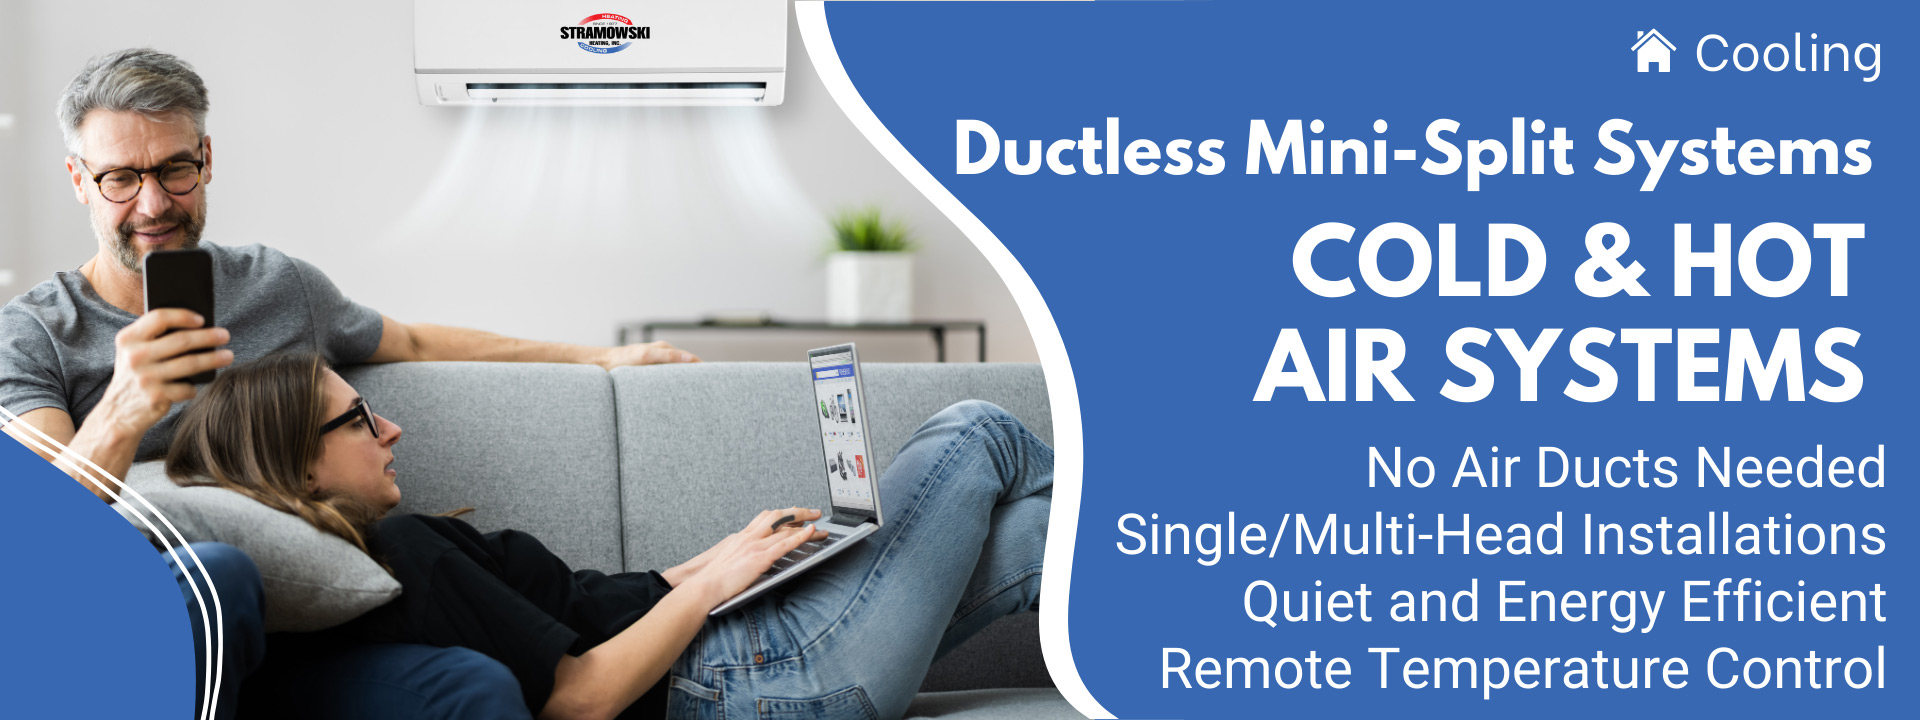 Ductless Mini-Split Systems - Heating Cooling